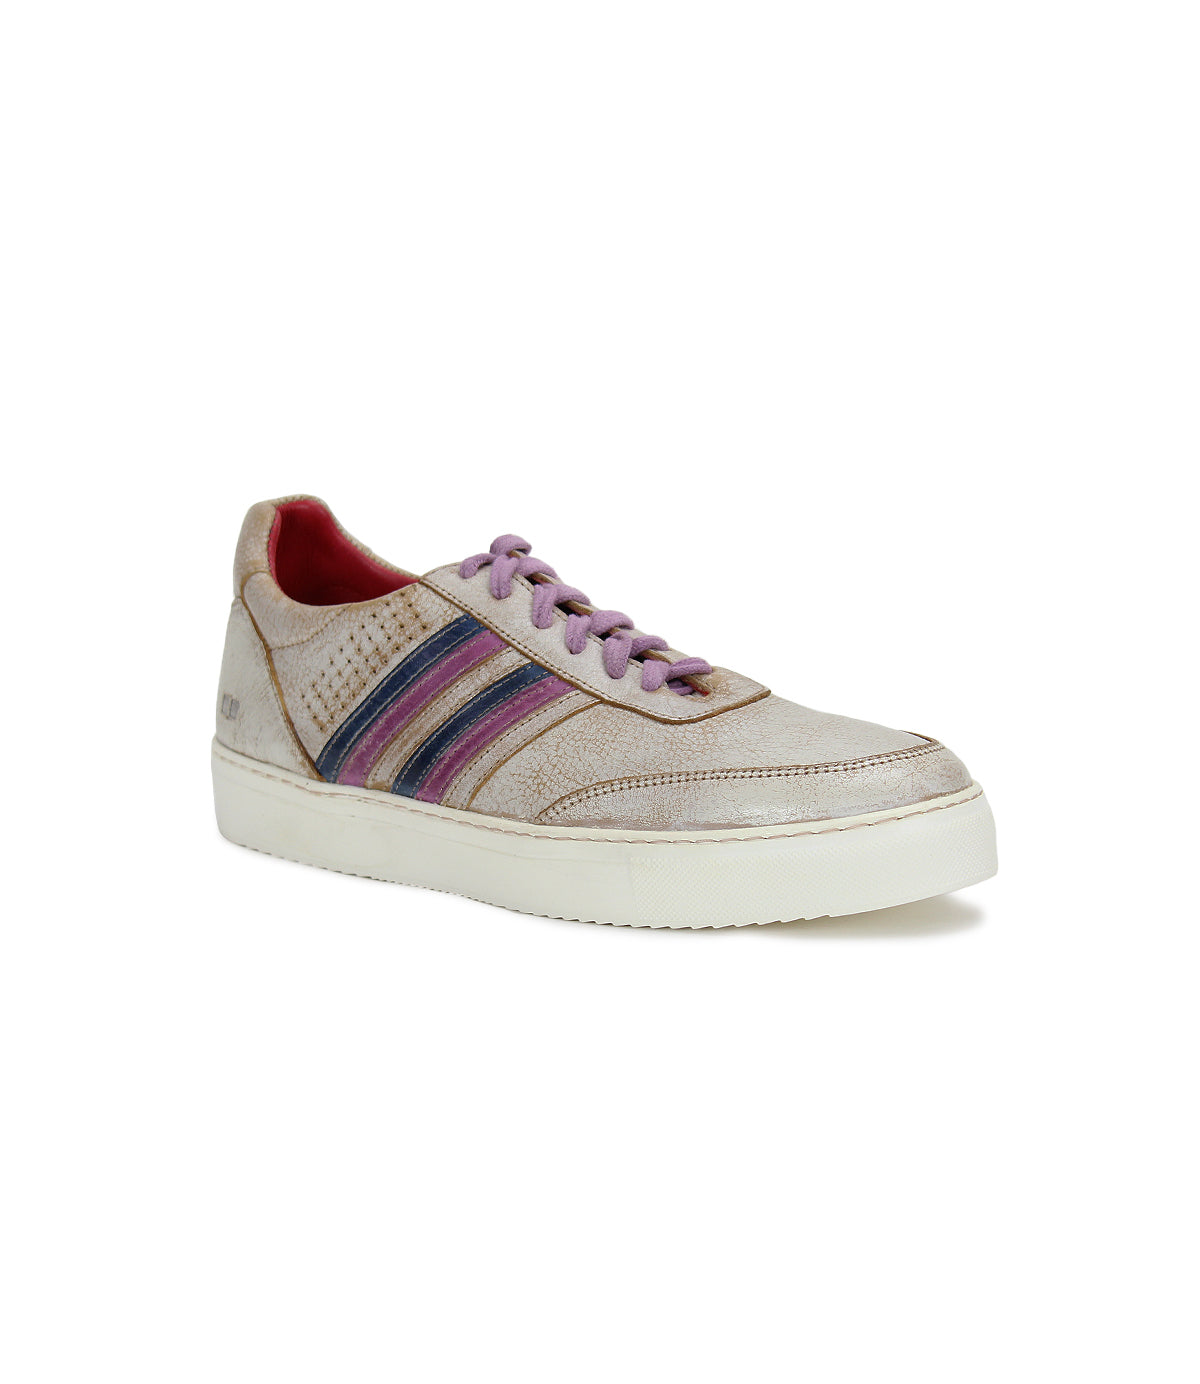 A pair of Bed Stu men's Carrington sneakers with a colorful stripe on the side.